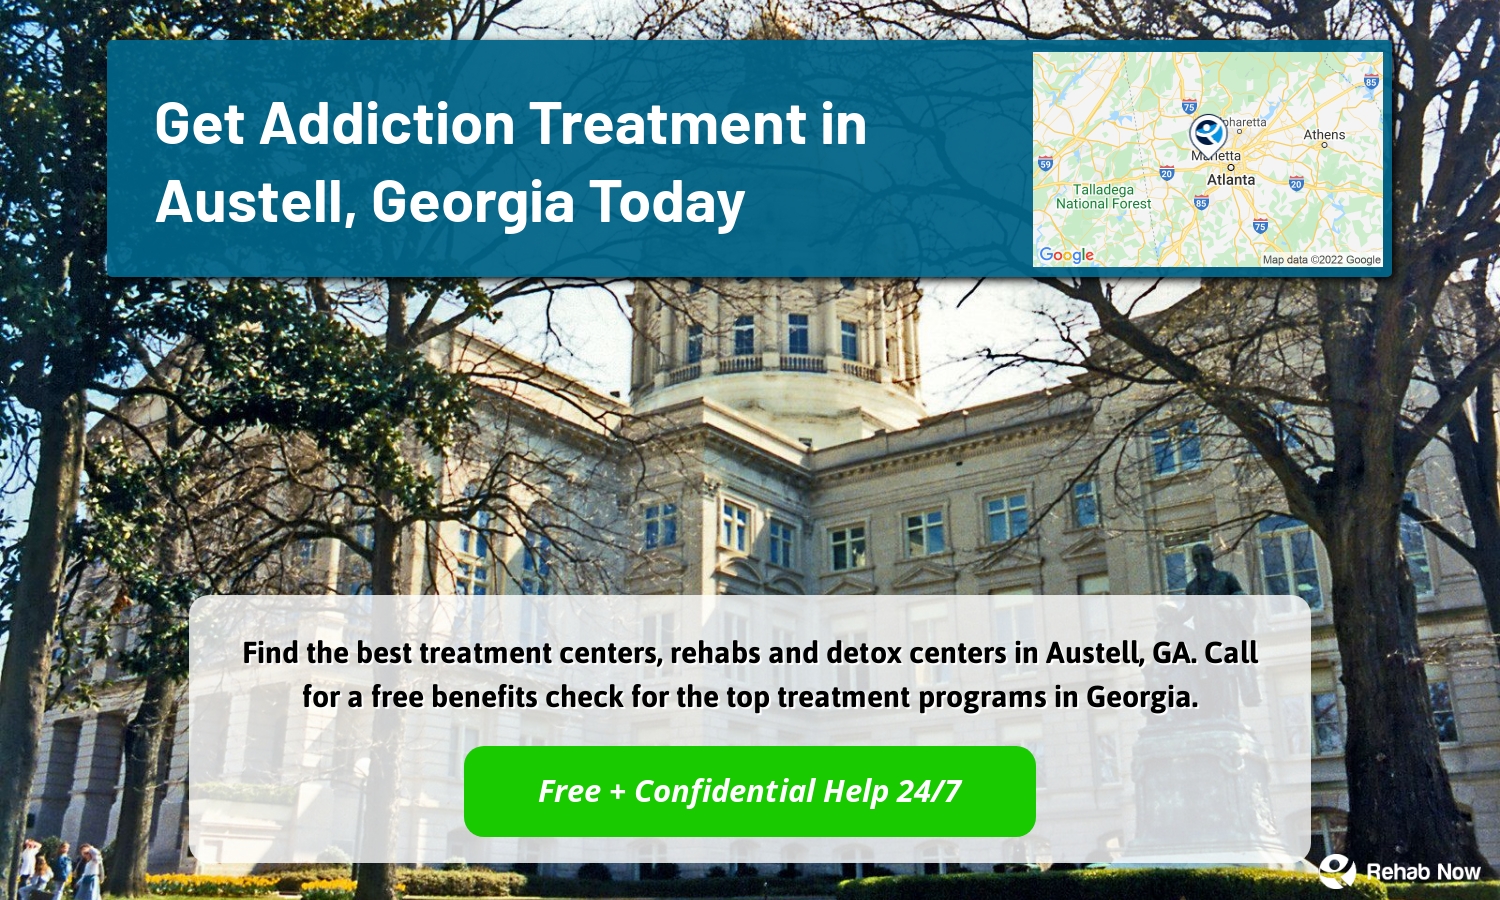 Find the best treatment centers, rehabs and detox centers in Austell, GA. Call for a free benefits check for the top treatment programs in Georgia.